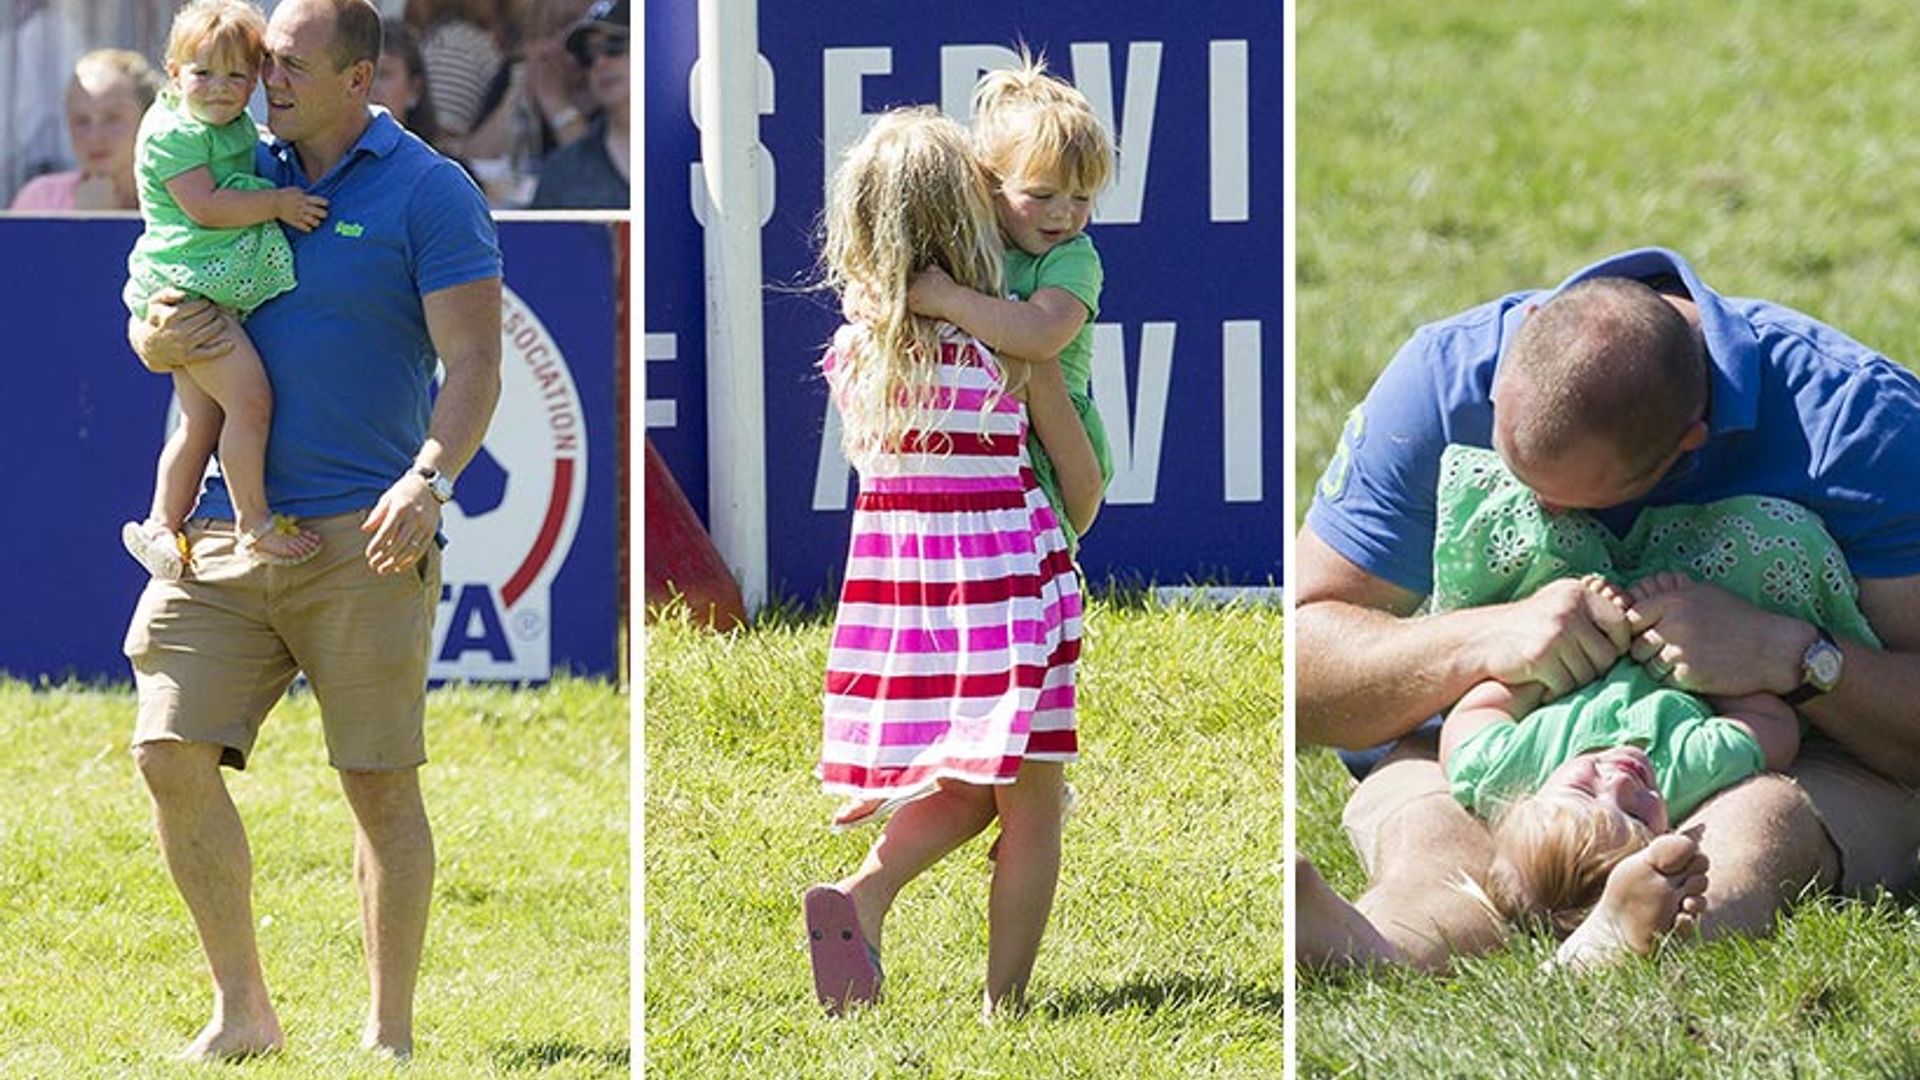 Adorable Mia Tindall spends day with family at horse festival